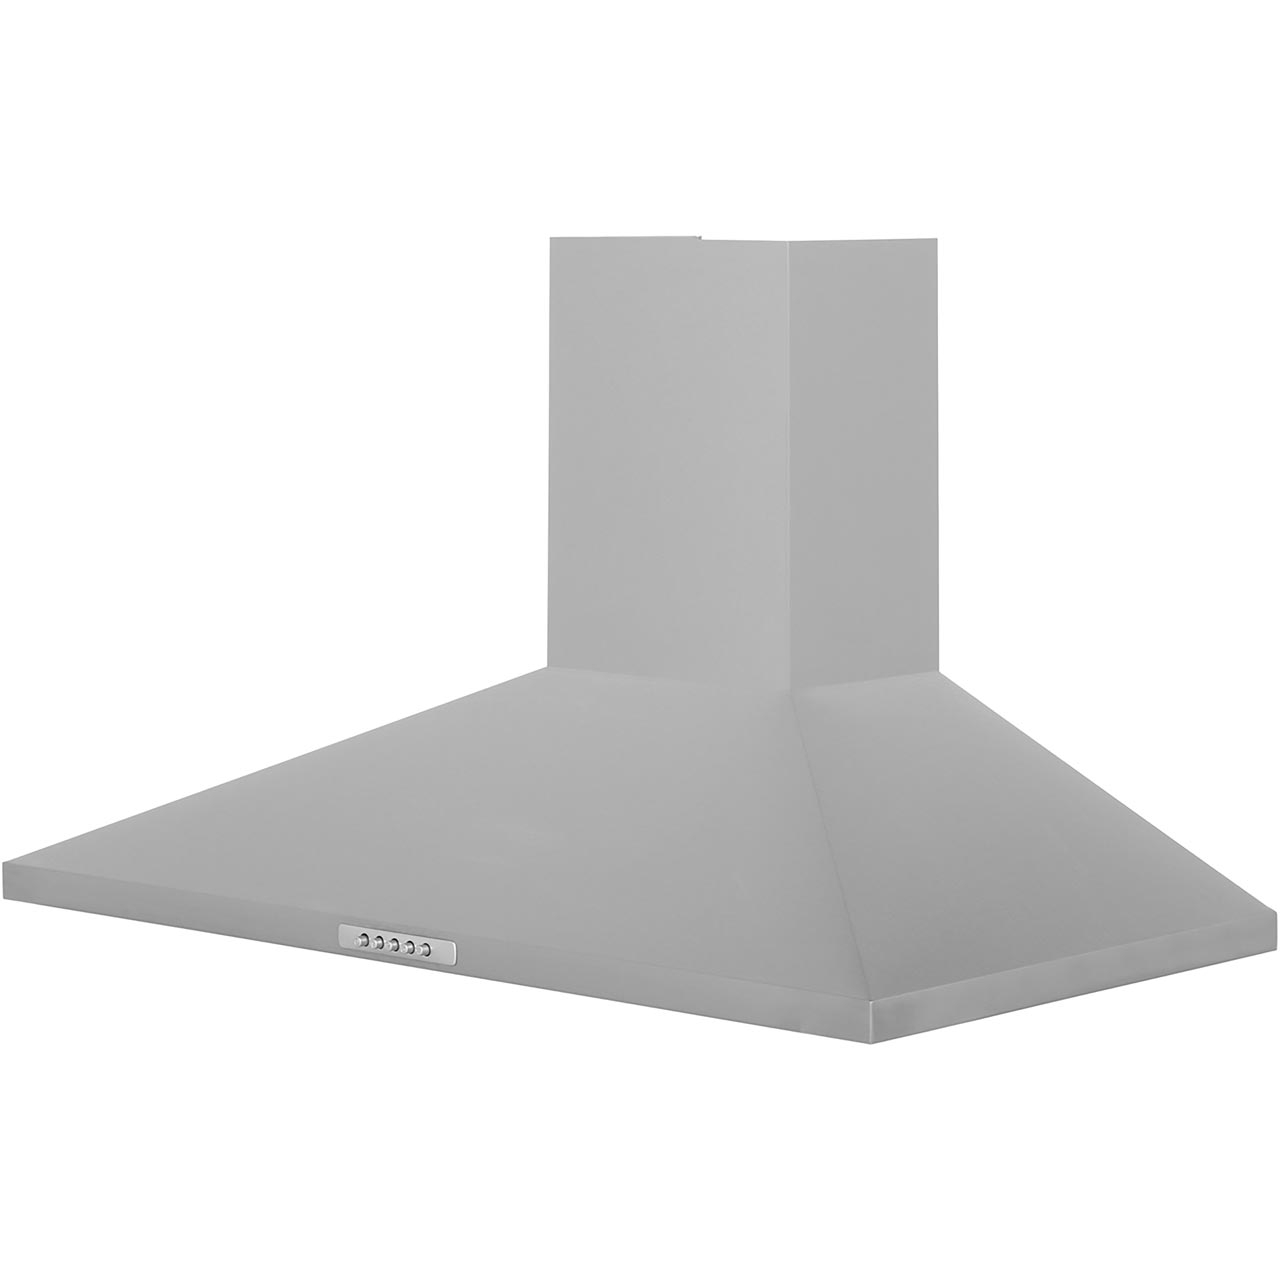 Details About Belling Chim90ss Unbranded Built In 90cm 3 Speeds E Chimney Cooker Hood with regard to proportions 1280 X 1280